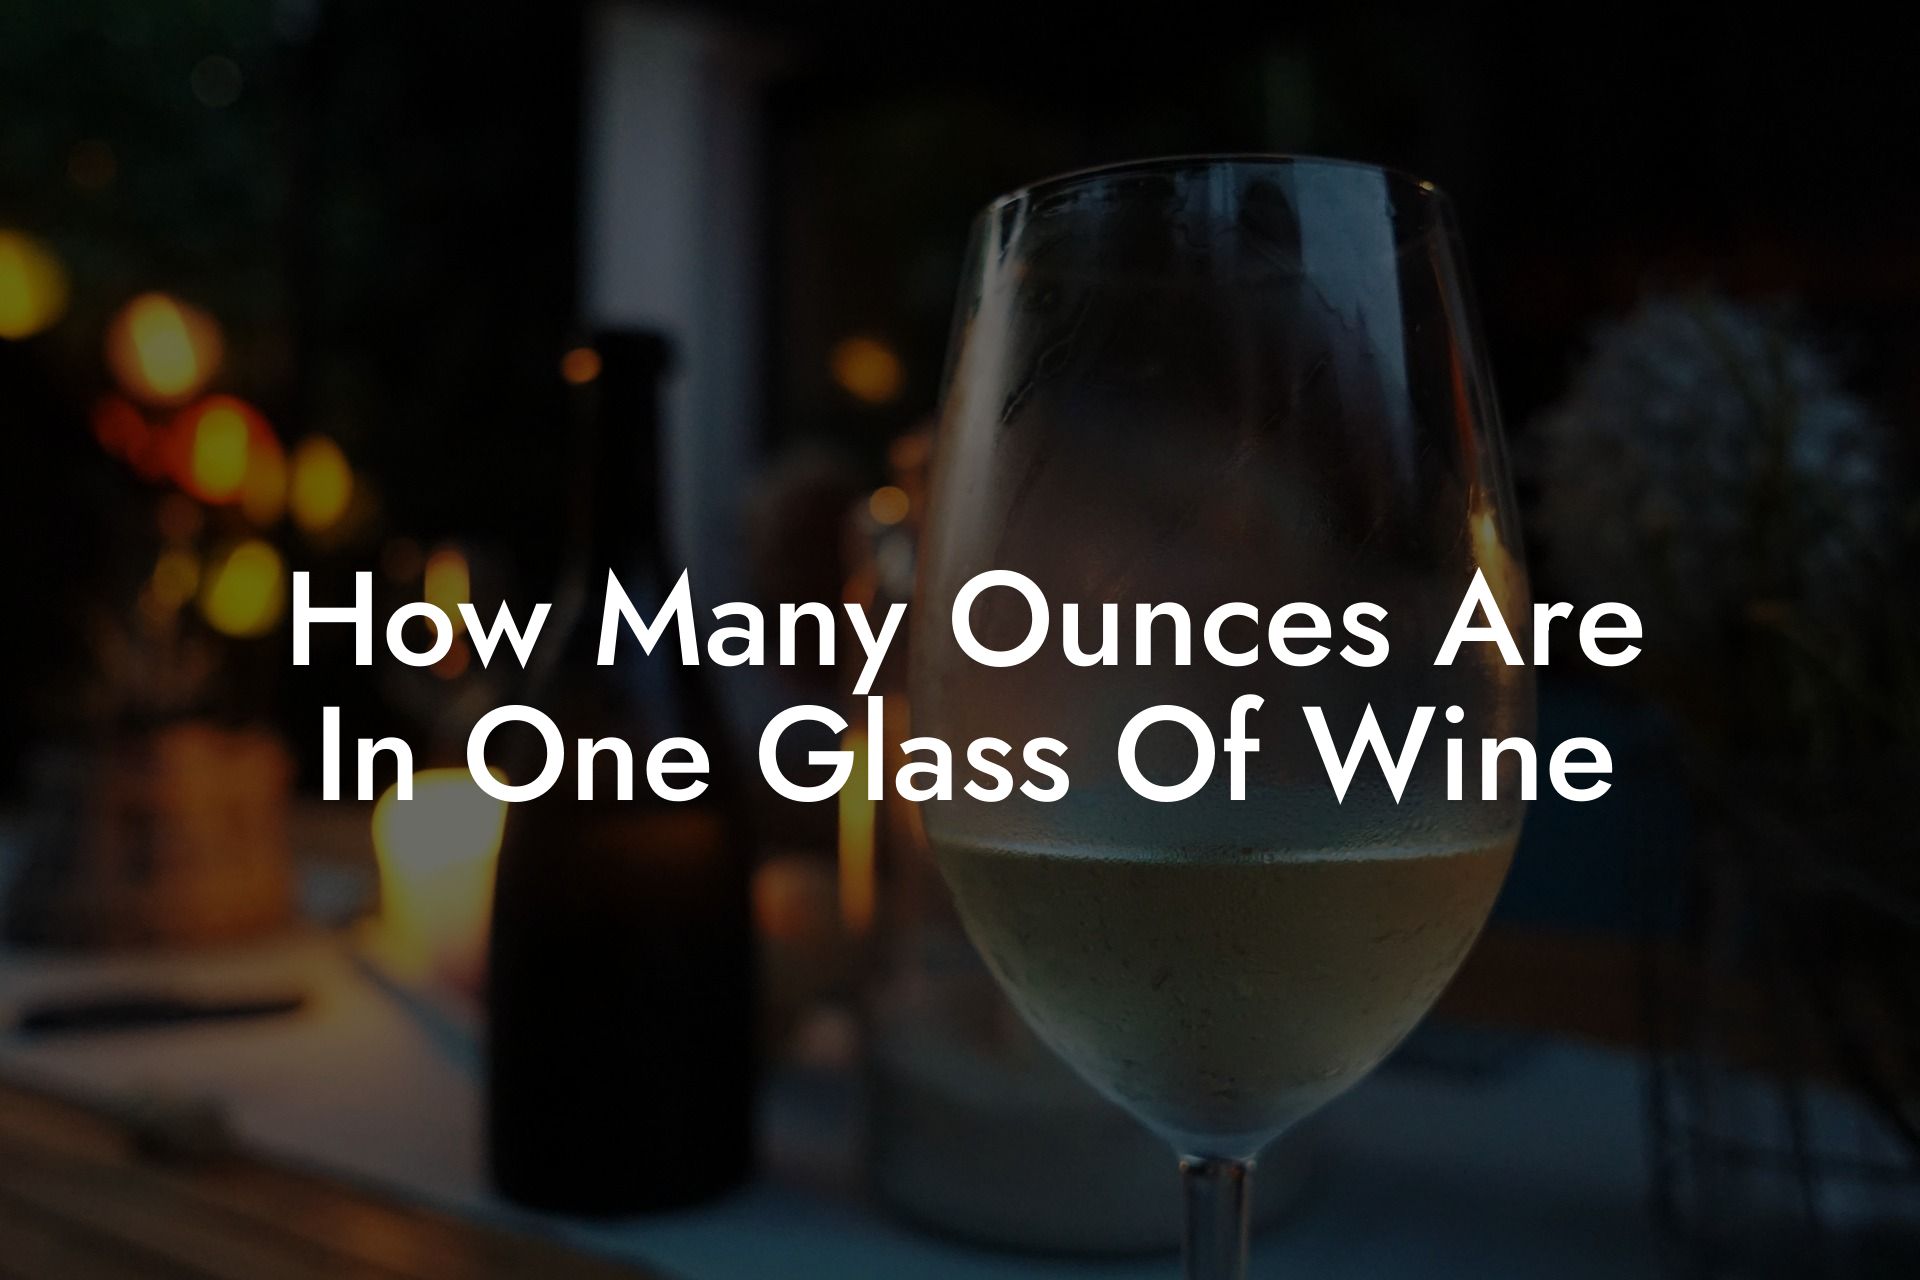 How Many Ounces Are In One Glass Of Wine